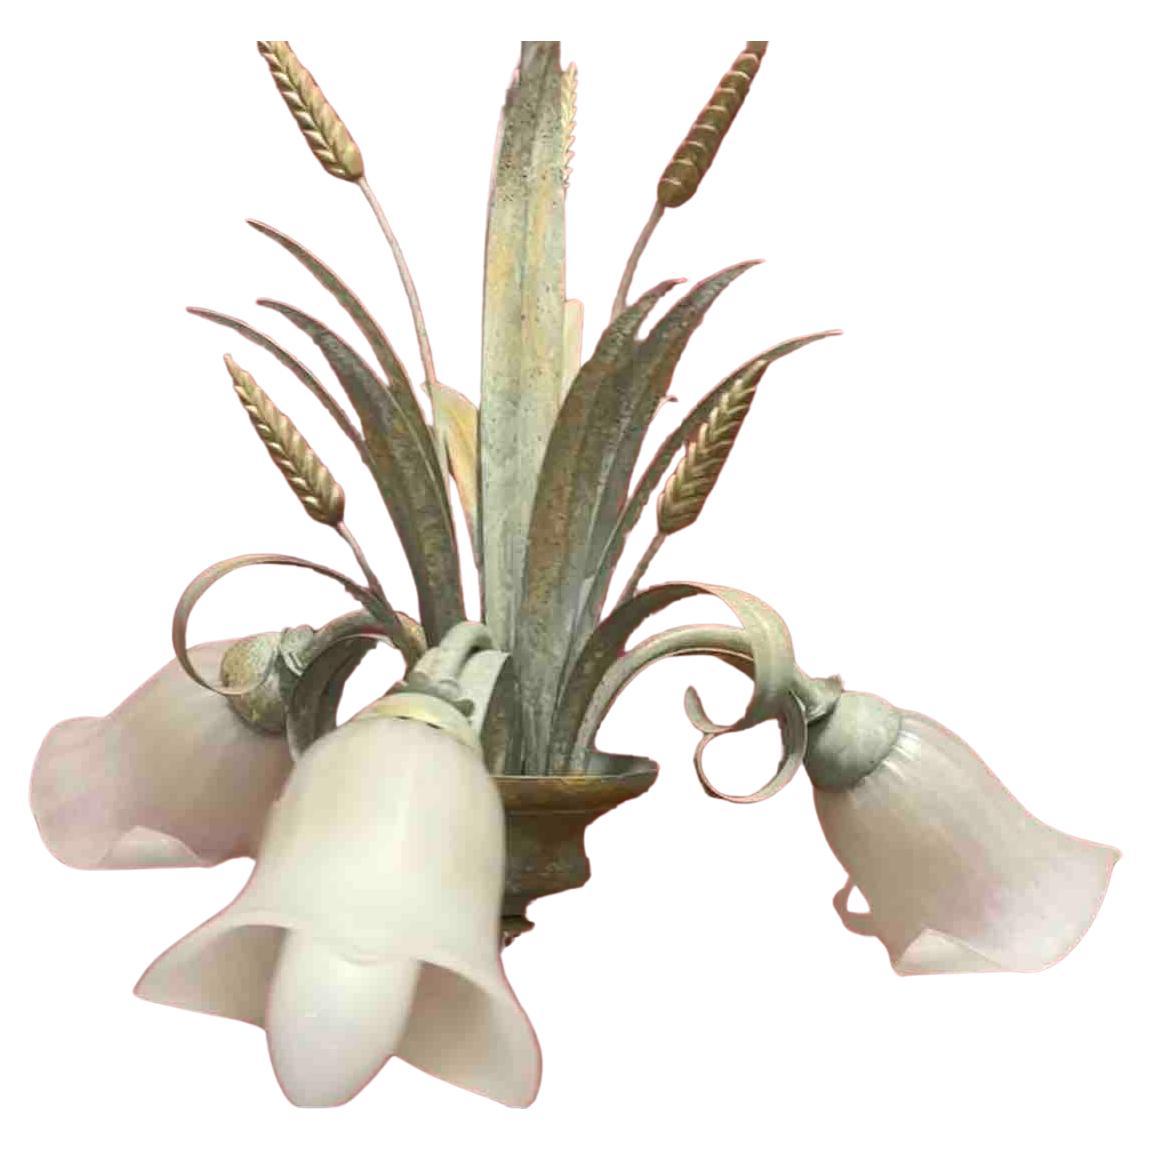 A Hollywood Regency midcentury gilt and verdigris tole wheat sheaf chandelier in Coco Chanel Style with beautiful Murano glass shades, the fixture requires three European E14 candelabra bulbs, each bulb up to 40 watts. This light has a beautiful